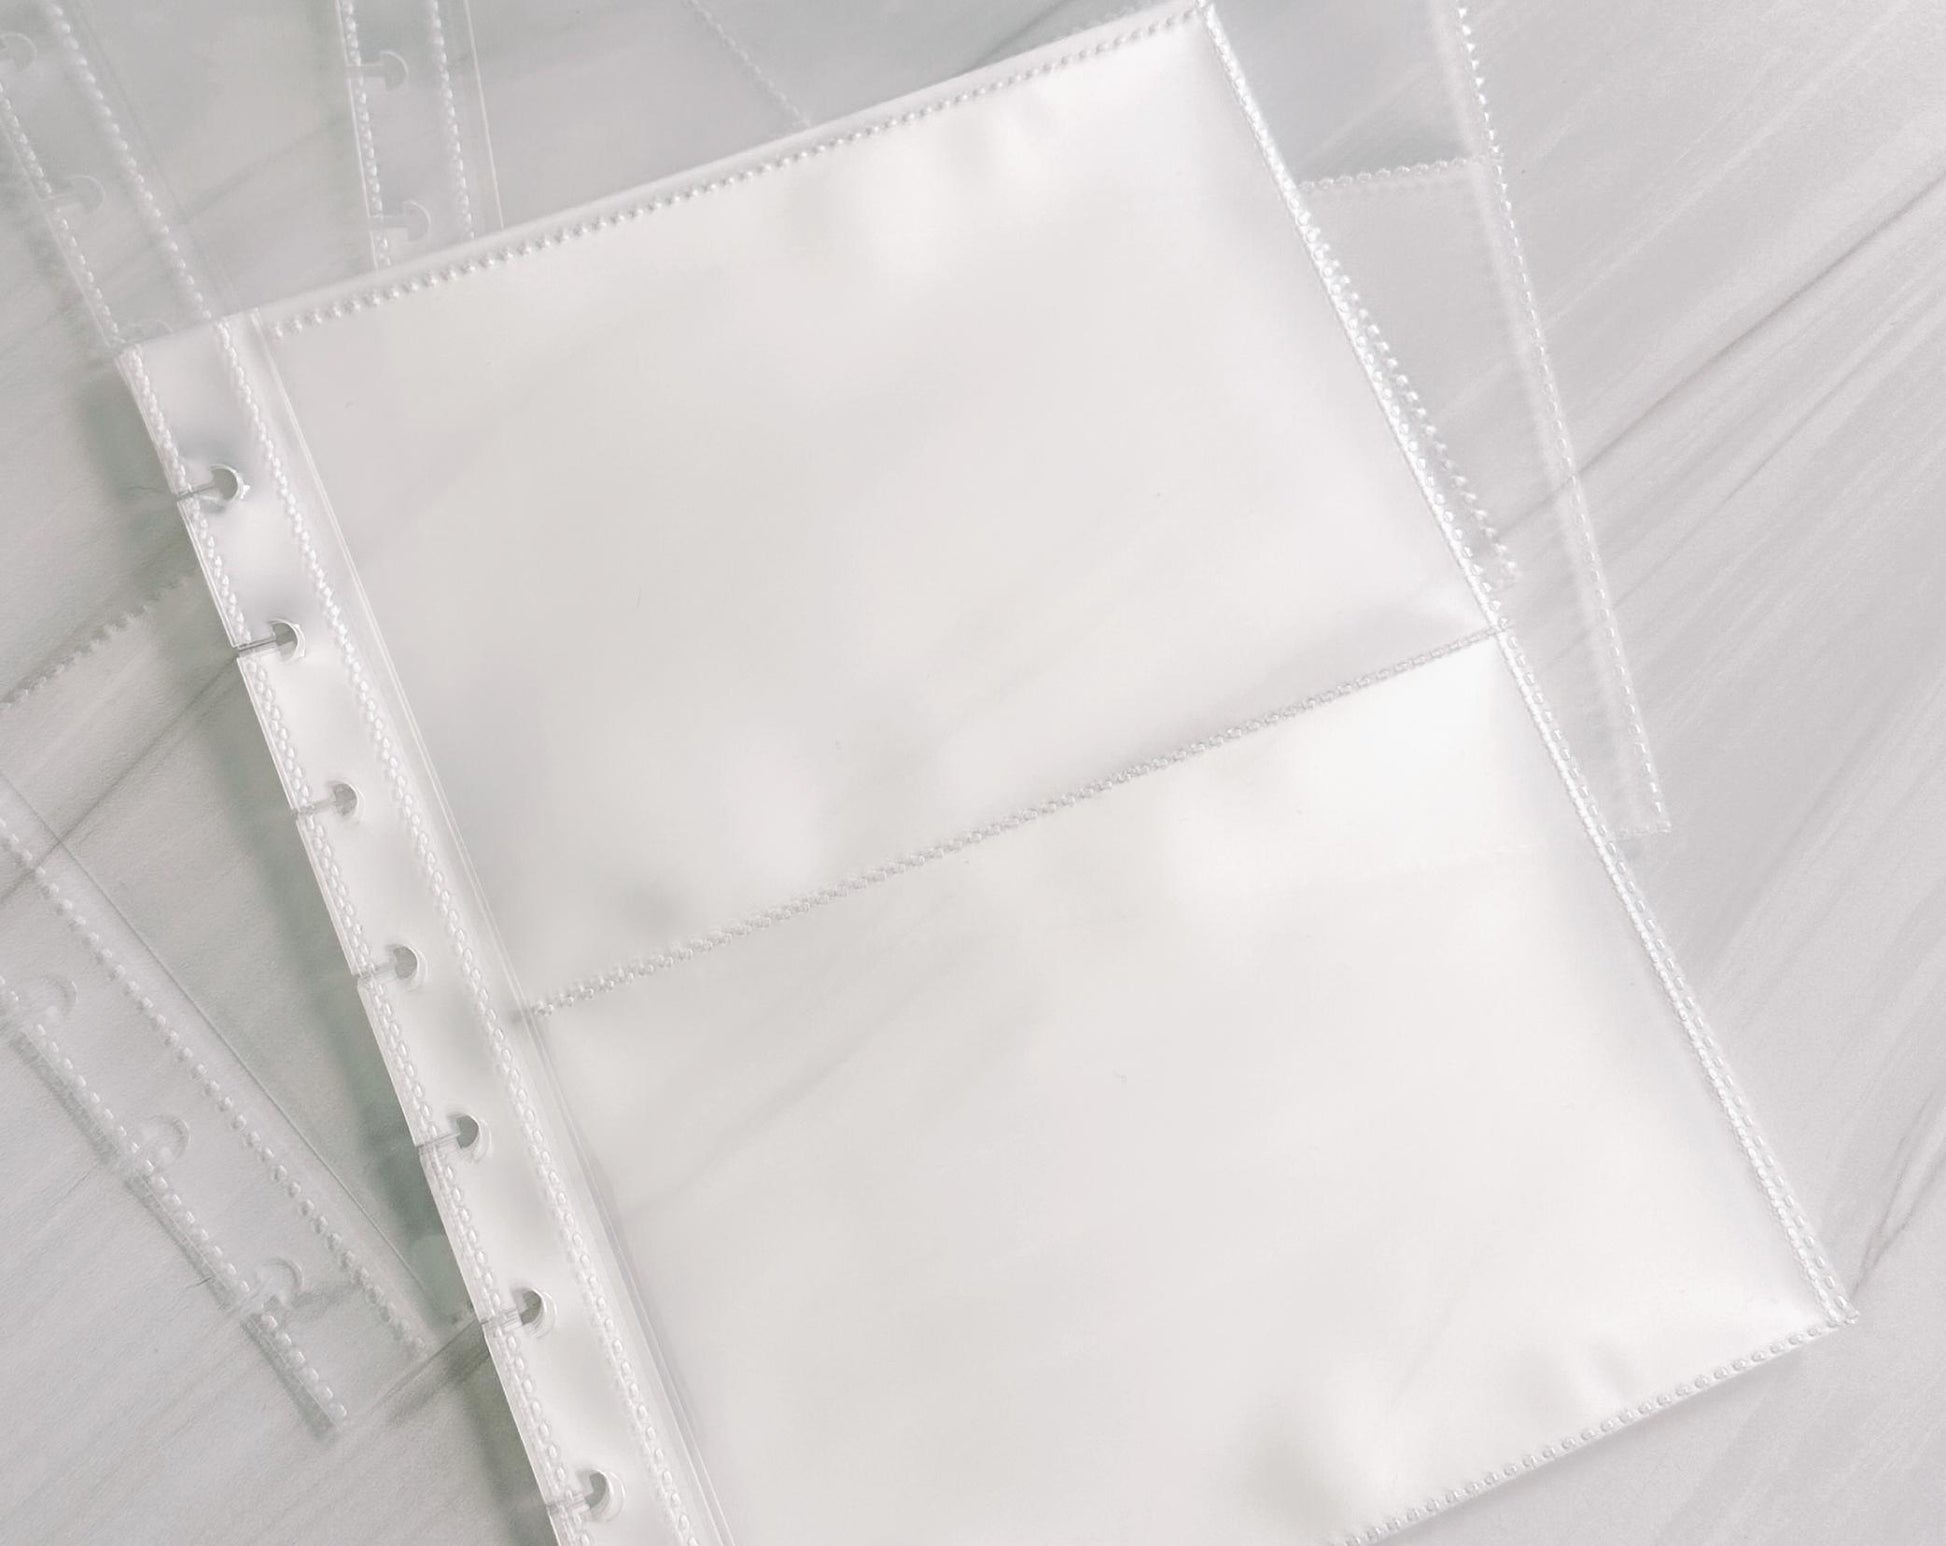 10 Pack of Two Pocket Sleeves - Fits 4"x6" Sheets-Cricket Paper Co.